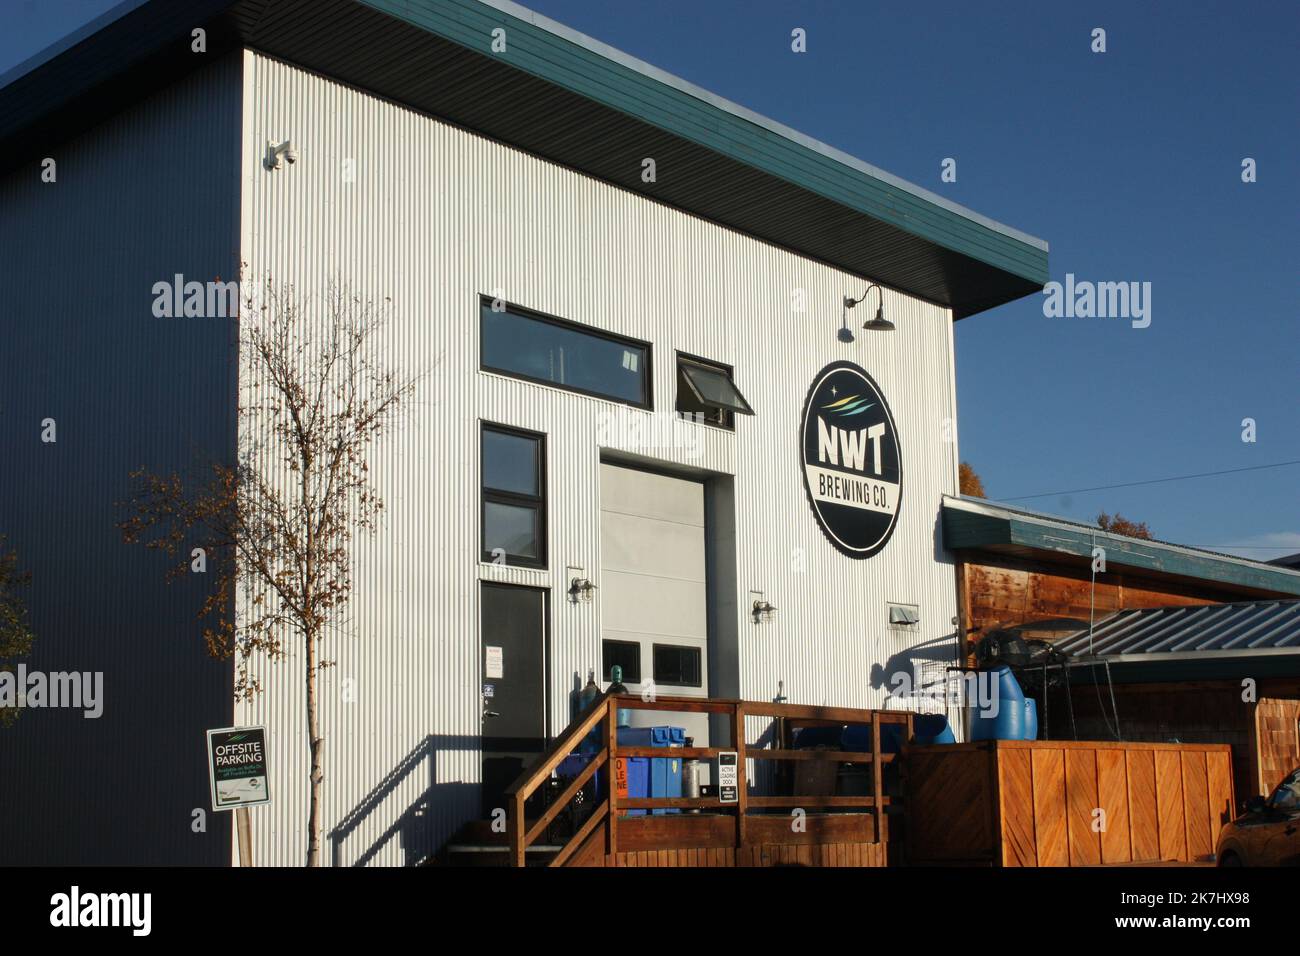 The NWT Brewery in Yellowknife, Northwest Territories, Canada Stock Photo